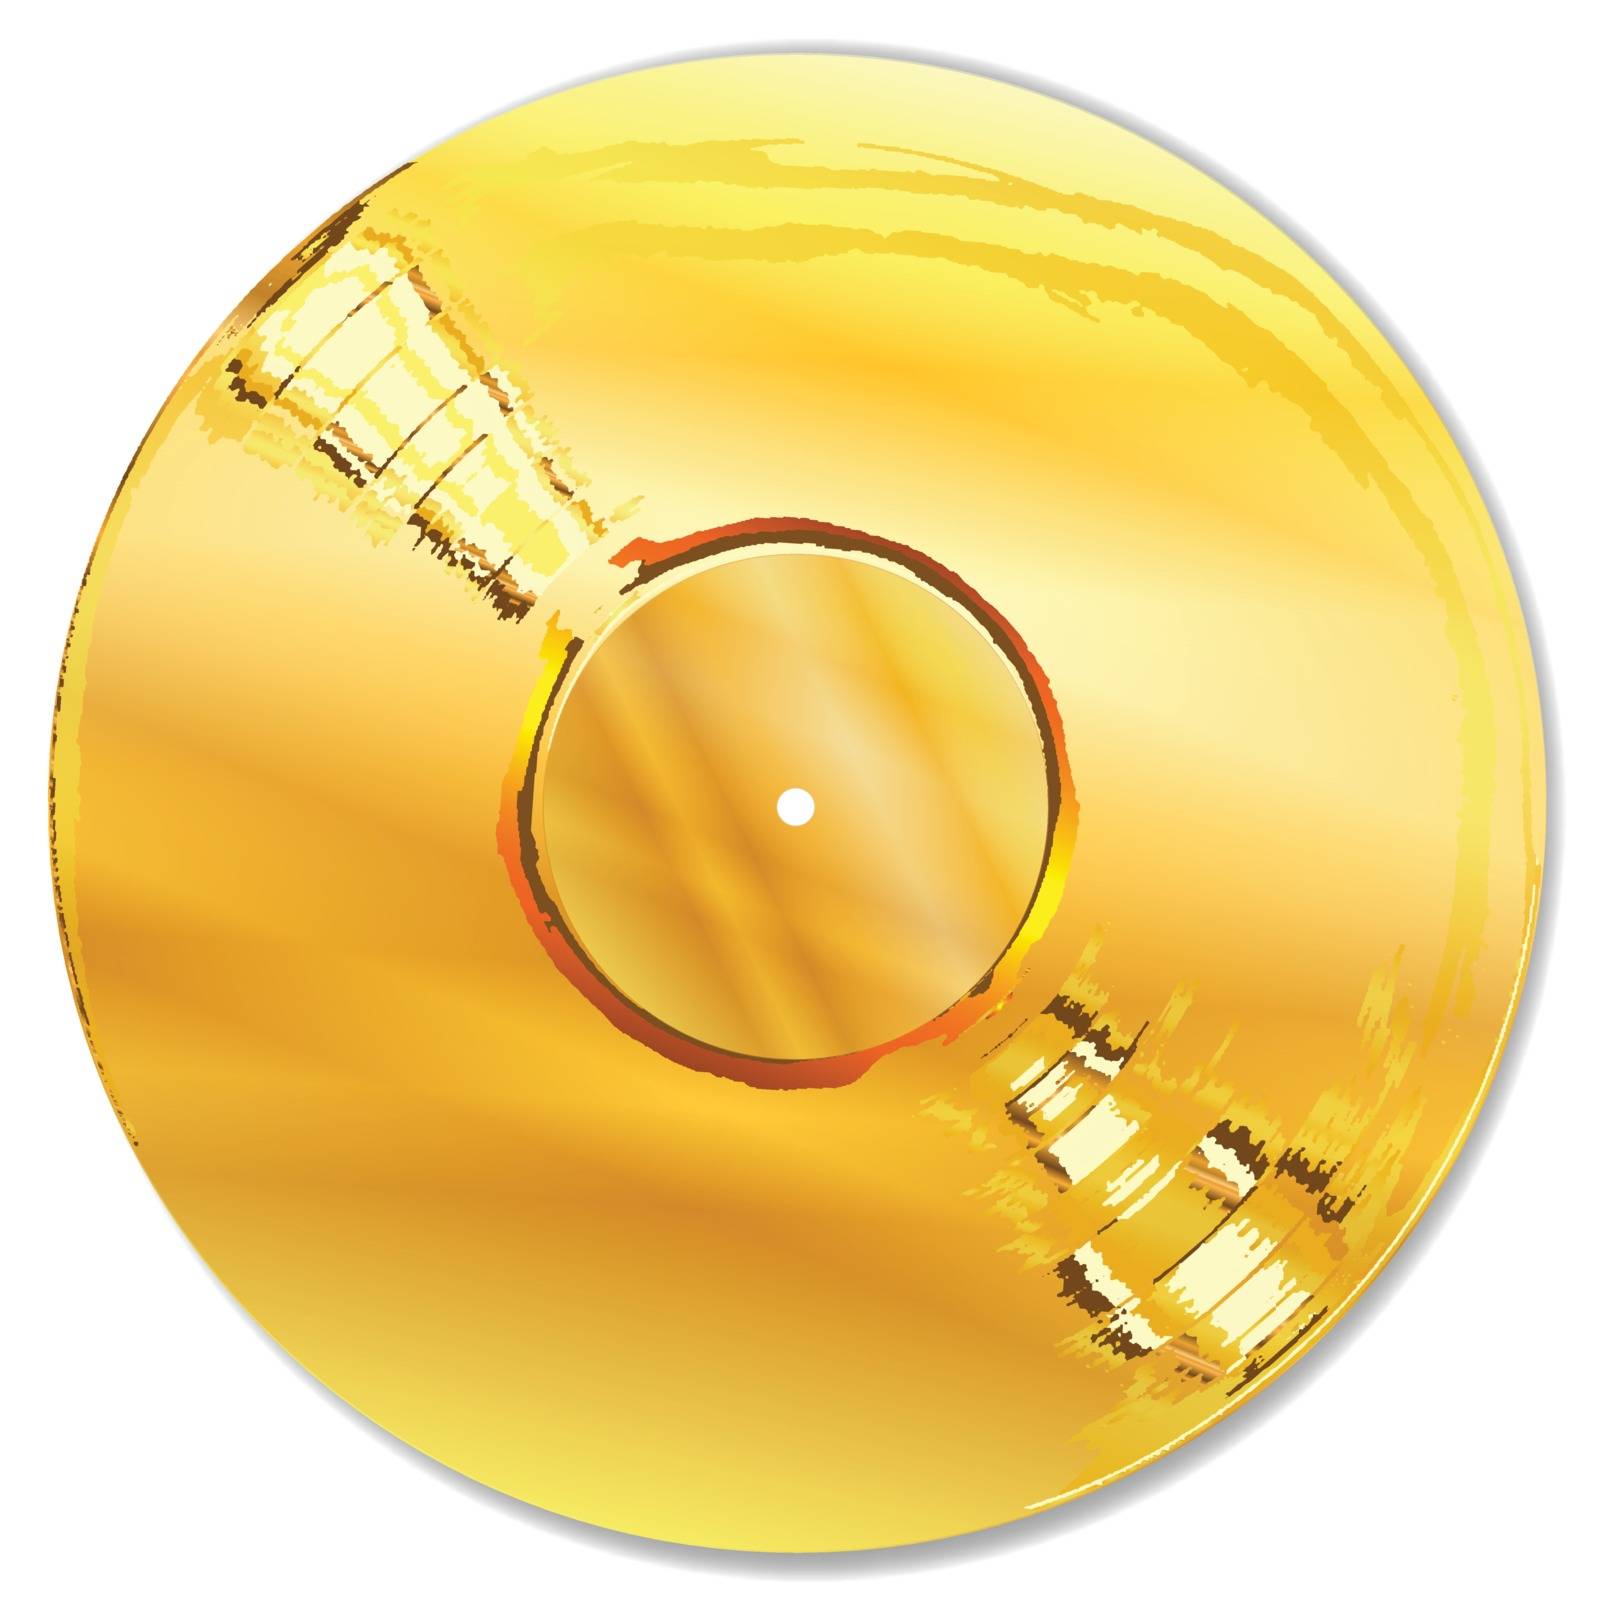 A golden record as presented to million seller artists on a white background